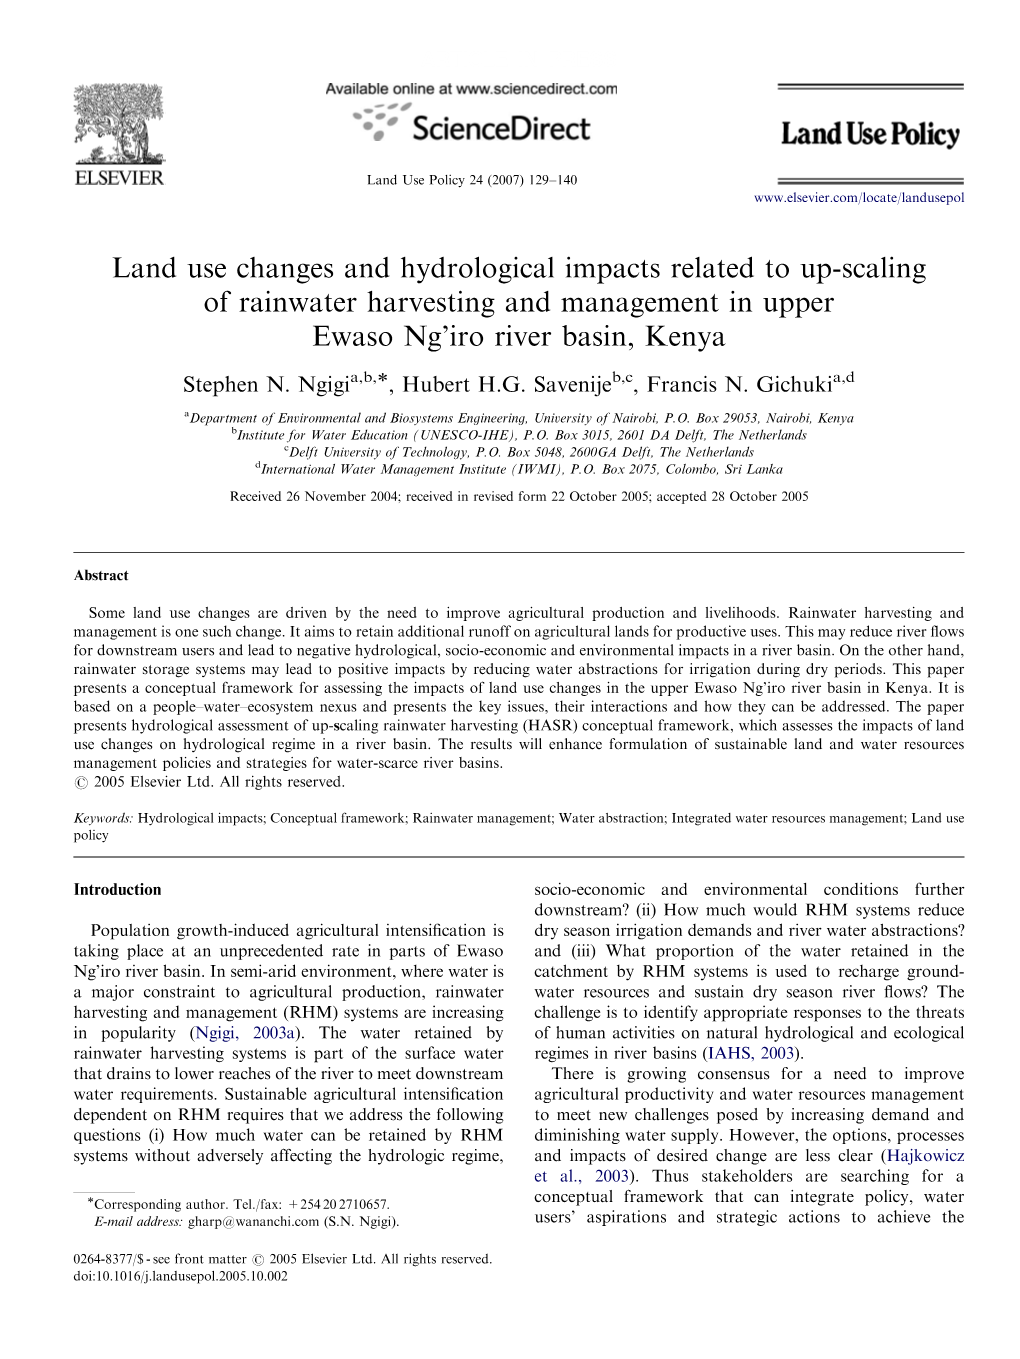 Land Use Changes and Hydrological Impacts Related to Up-Scaling of Rainwater Harvesting and Management in Upper Ewaso Ng’Iro River Basin, Kenya